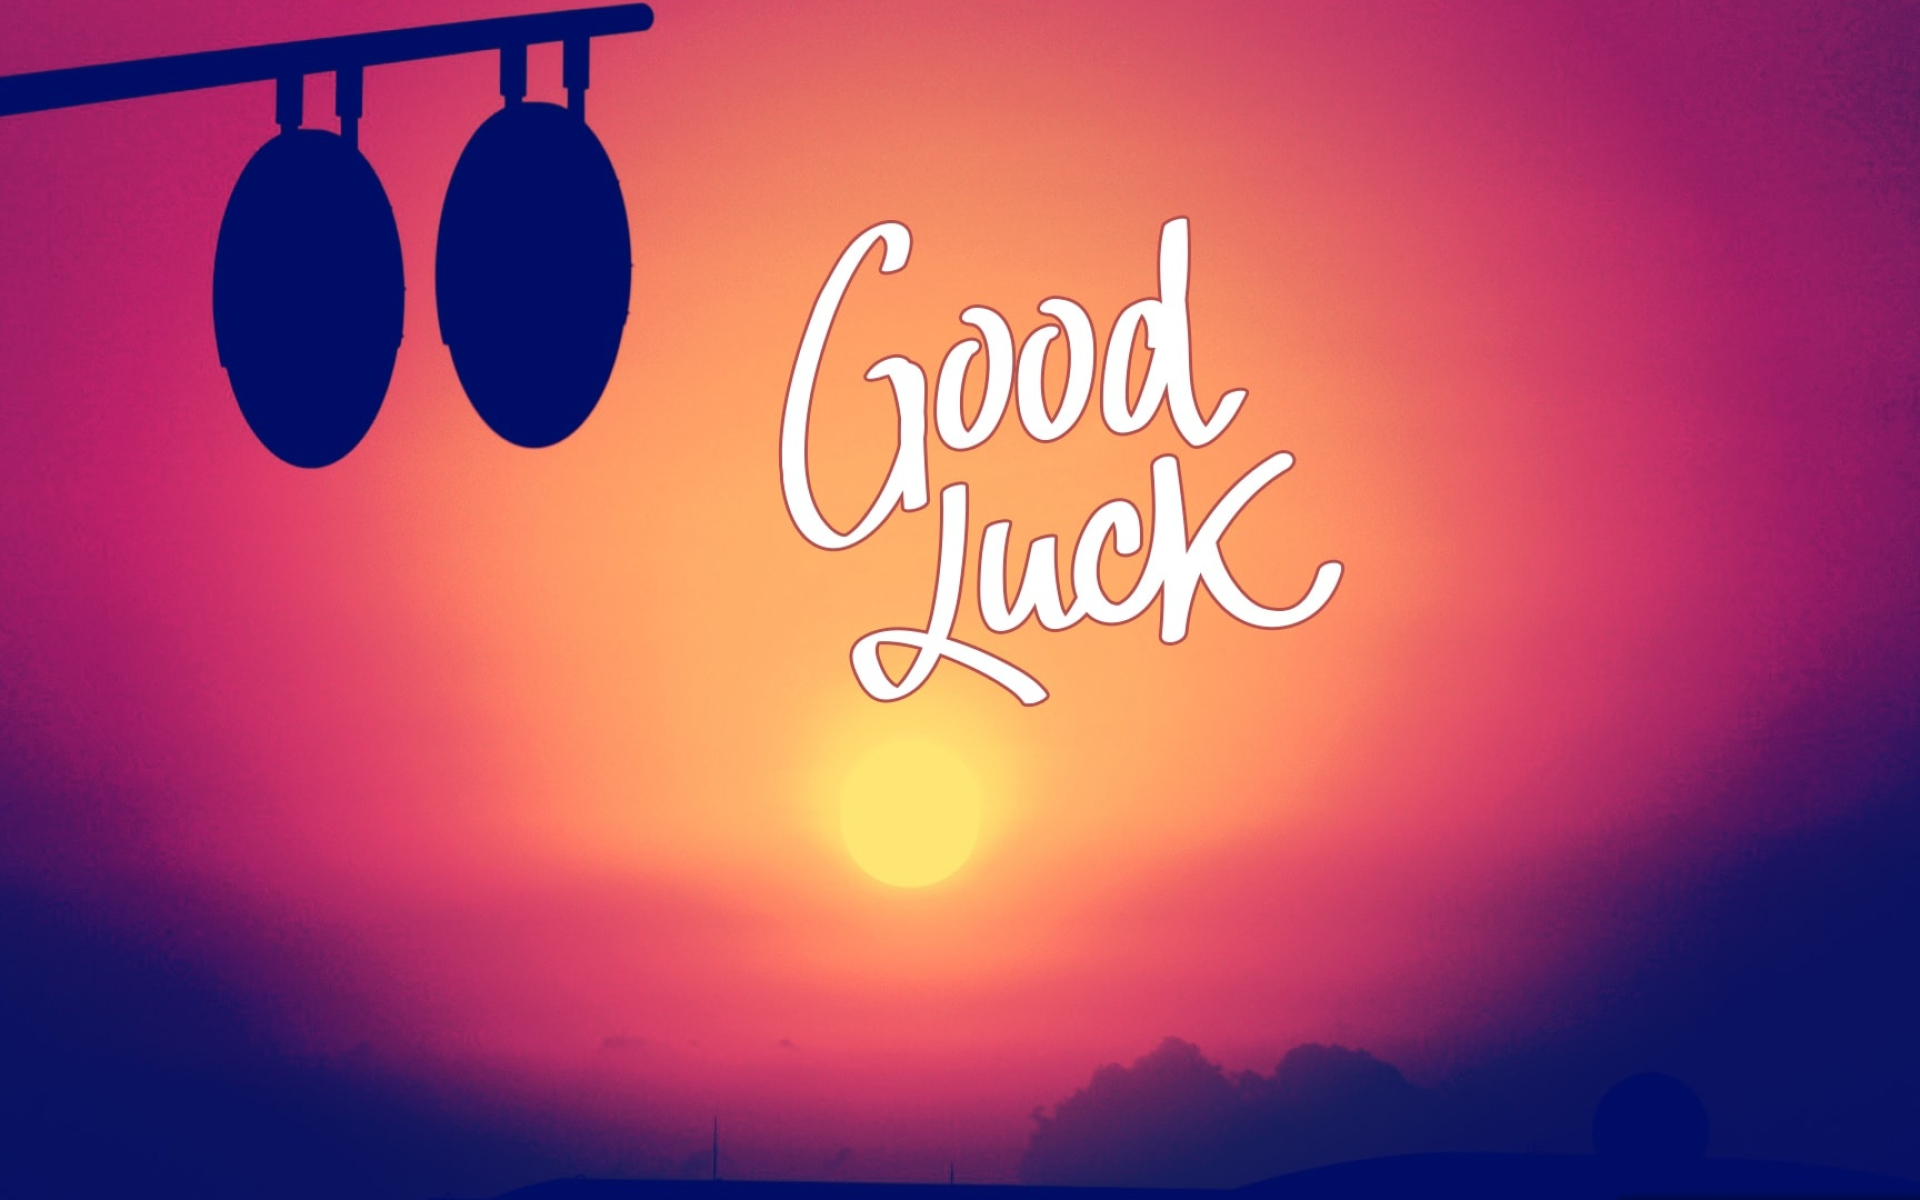 Good Luck: Best wishes card, Attracting good fortune, Minimalistic, A protection against misfortune. 1920x1200 HD Wallpaper.